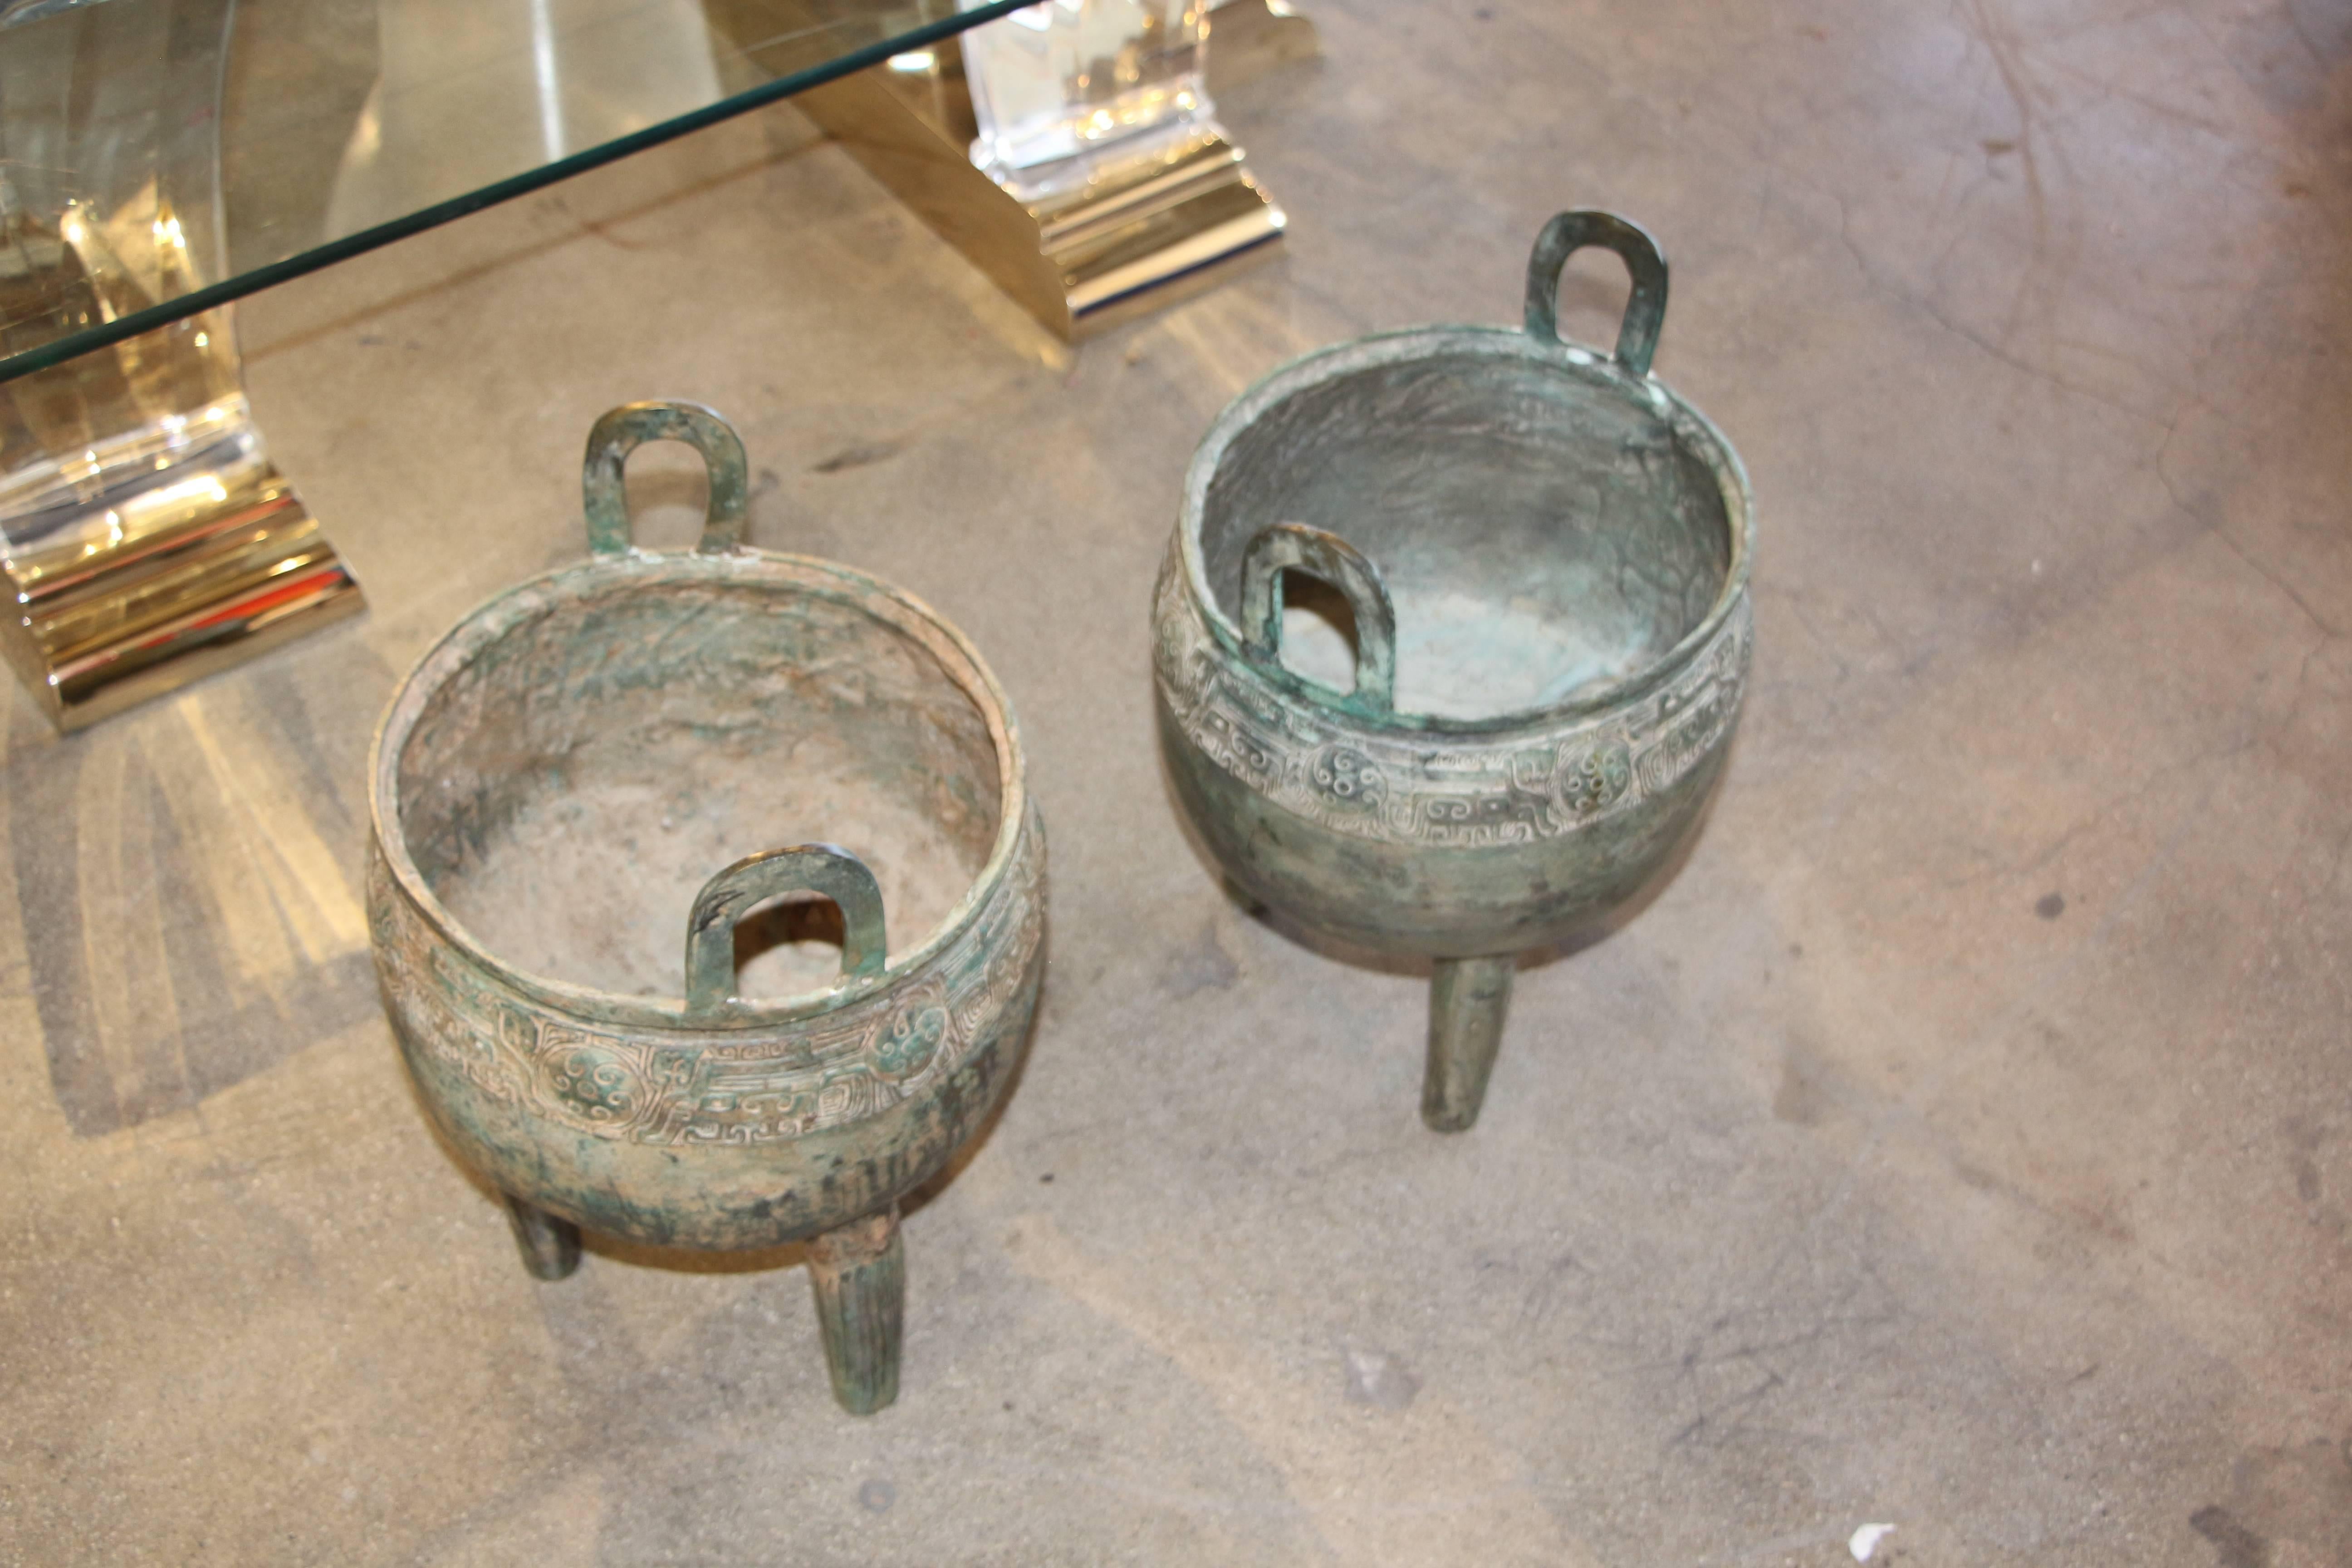 Pair Chinese Bronze Censers Circa 1900. Very well-made with hollow legs that required felt pads on the tripod legs. They are extremely elegant with great patina. Wear to the bodies and nicks, scratches and marks with age appropriate wear.